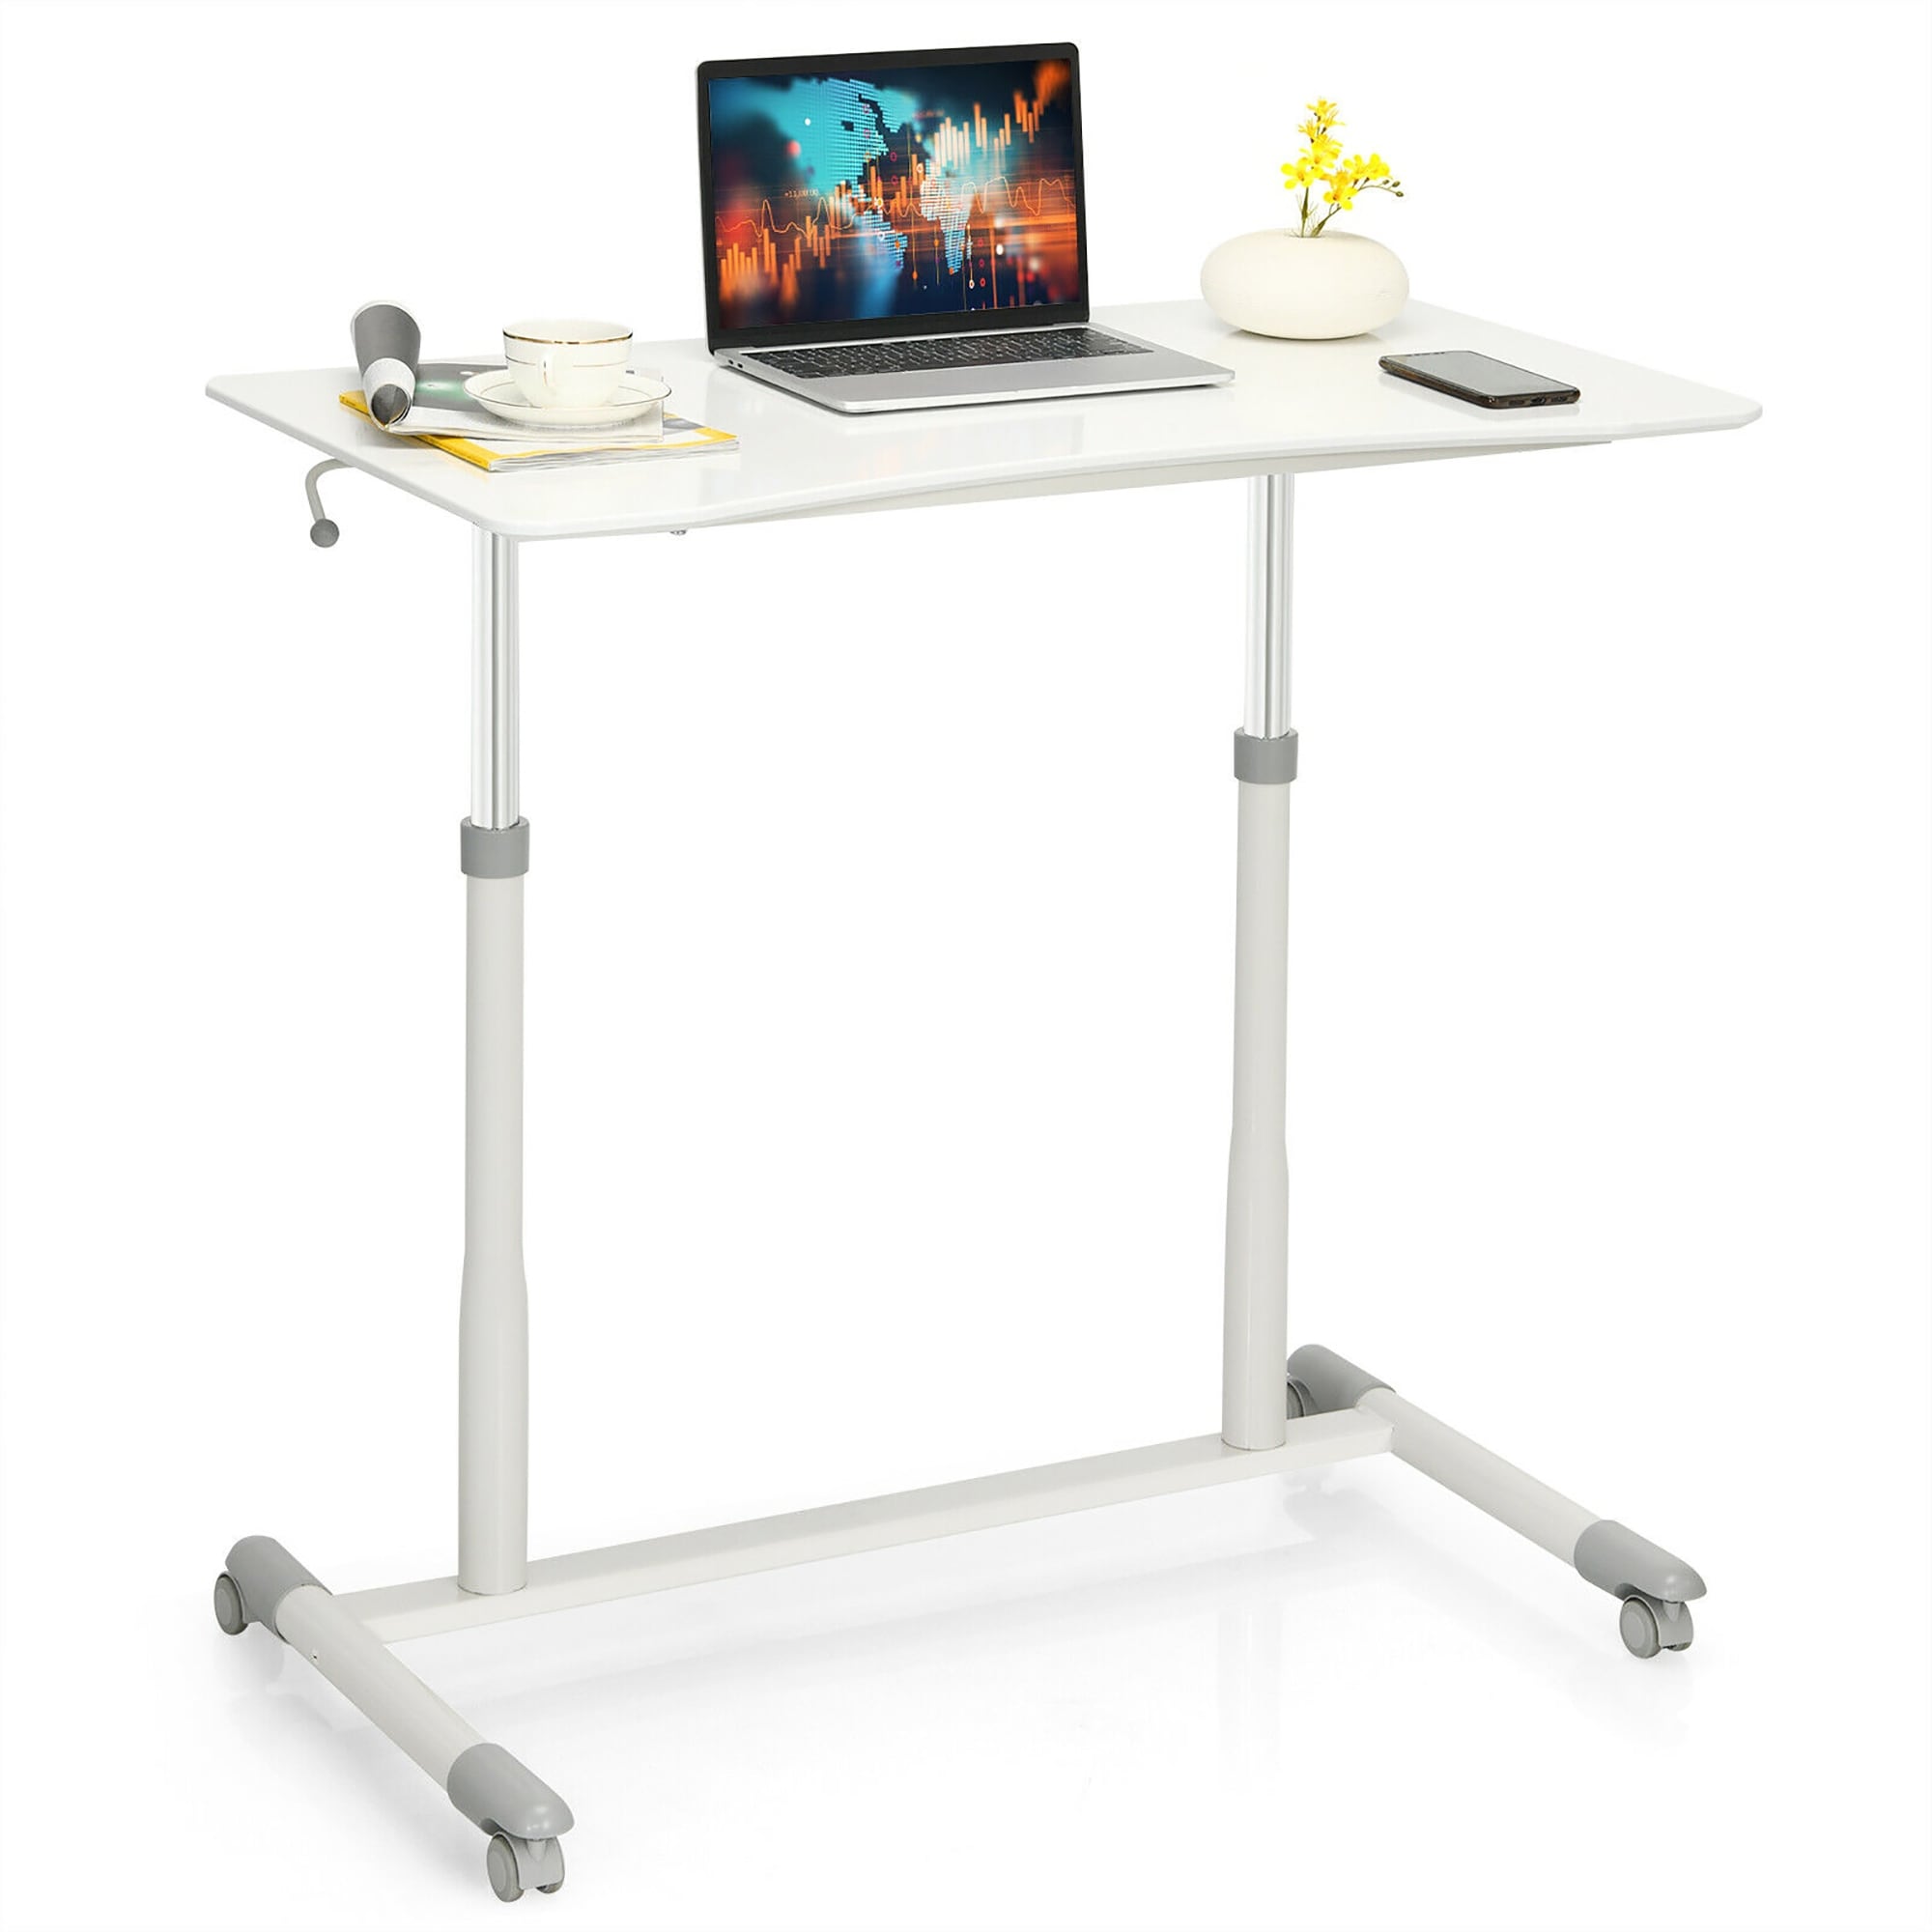 https://ak1.ostkcdn.com/images/products/is/images/direct/baf22cd5a7358a57bc00ccc86c4fda2fecdd3608/Costway-Height-Adjustable-Computer-Desk-Sit-to-Stand-Rolling-Notebook.jpg